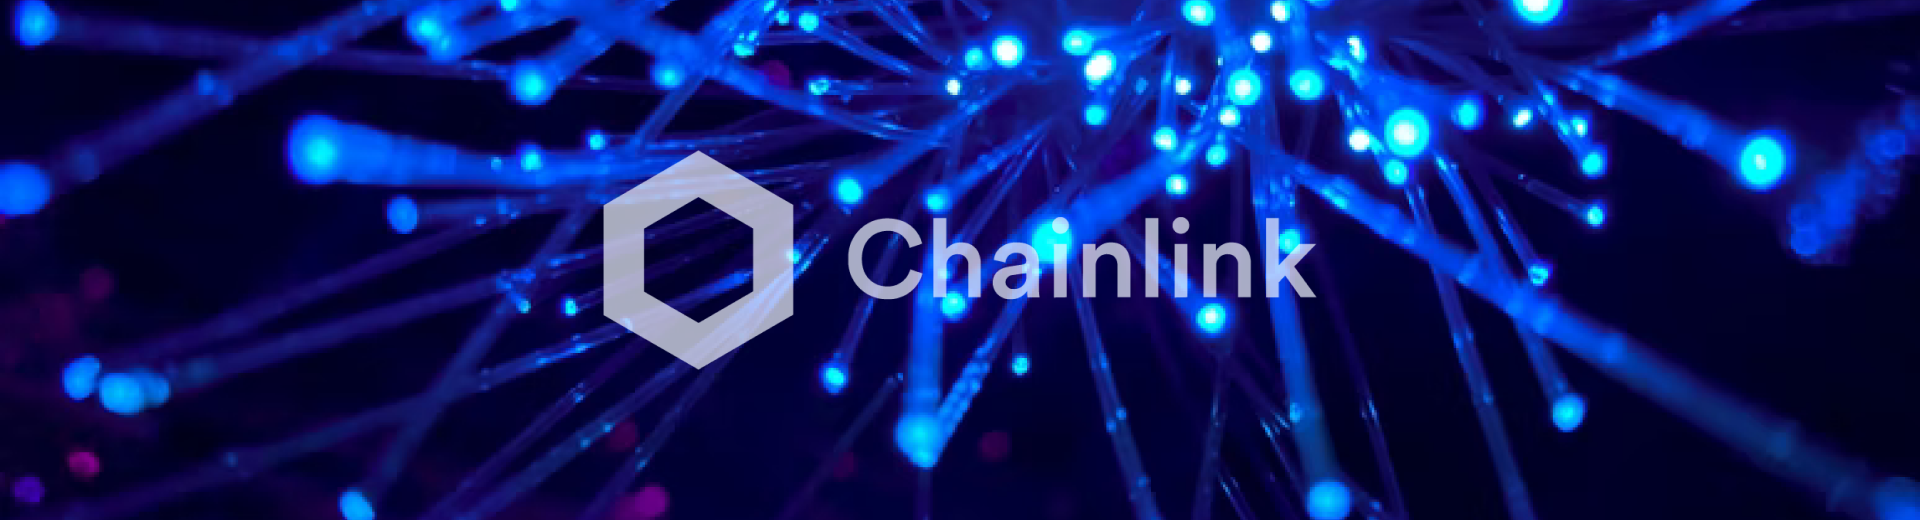 Hire Chainlink Developers